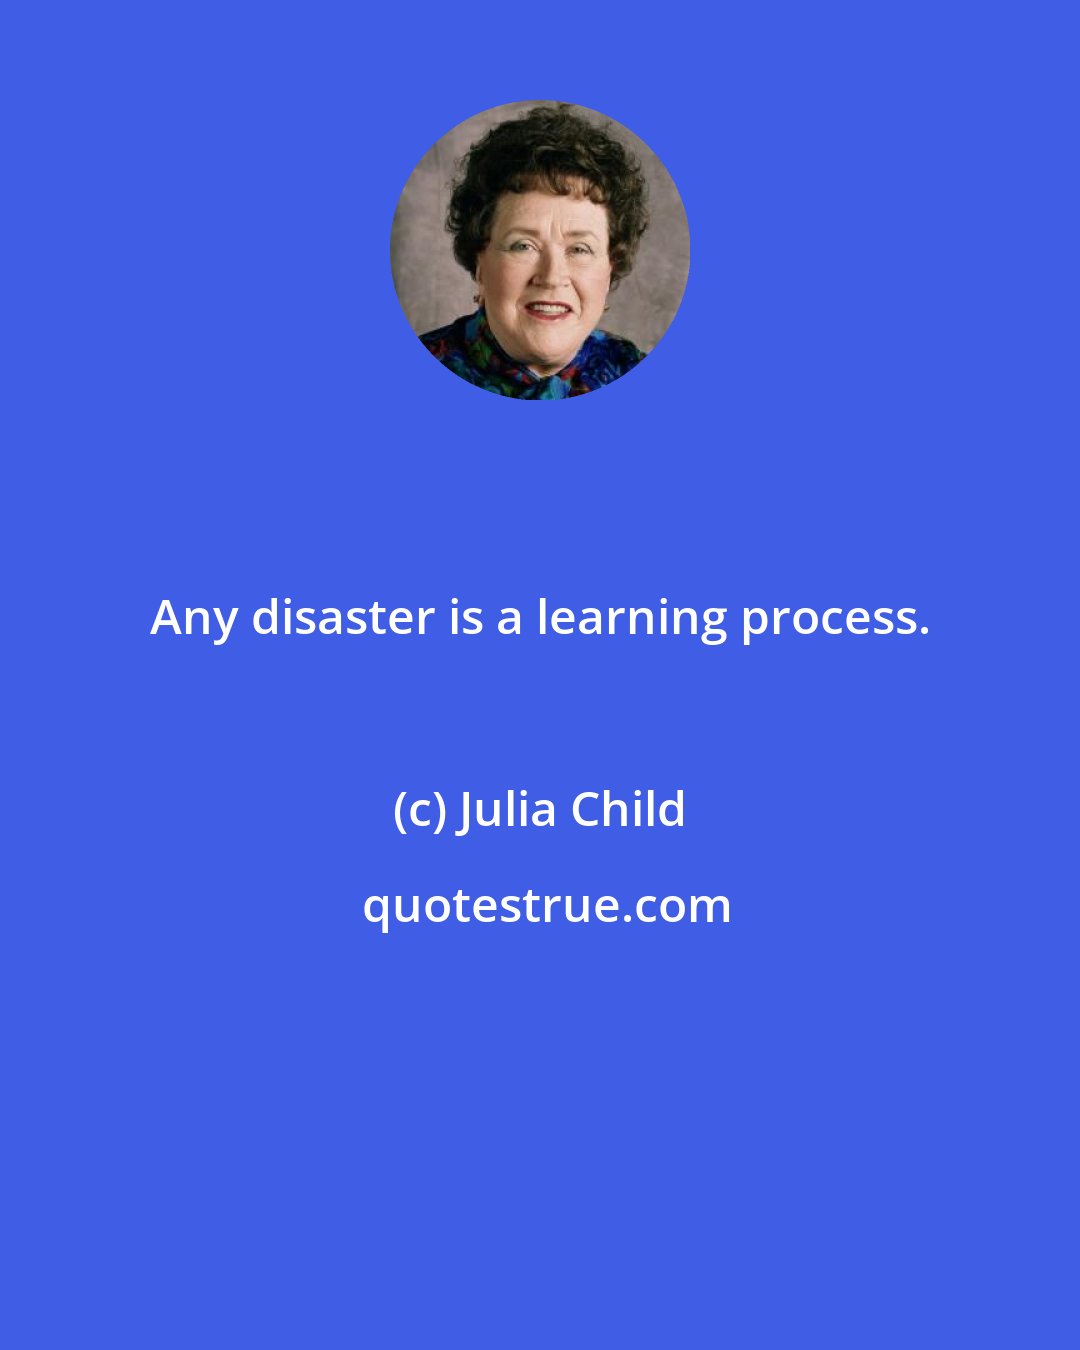 Julia Child: Any disaster is a learning process.